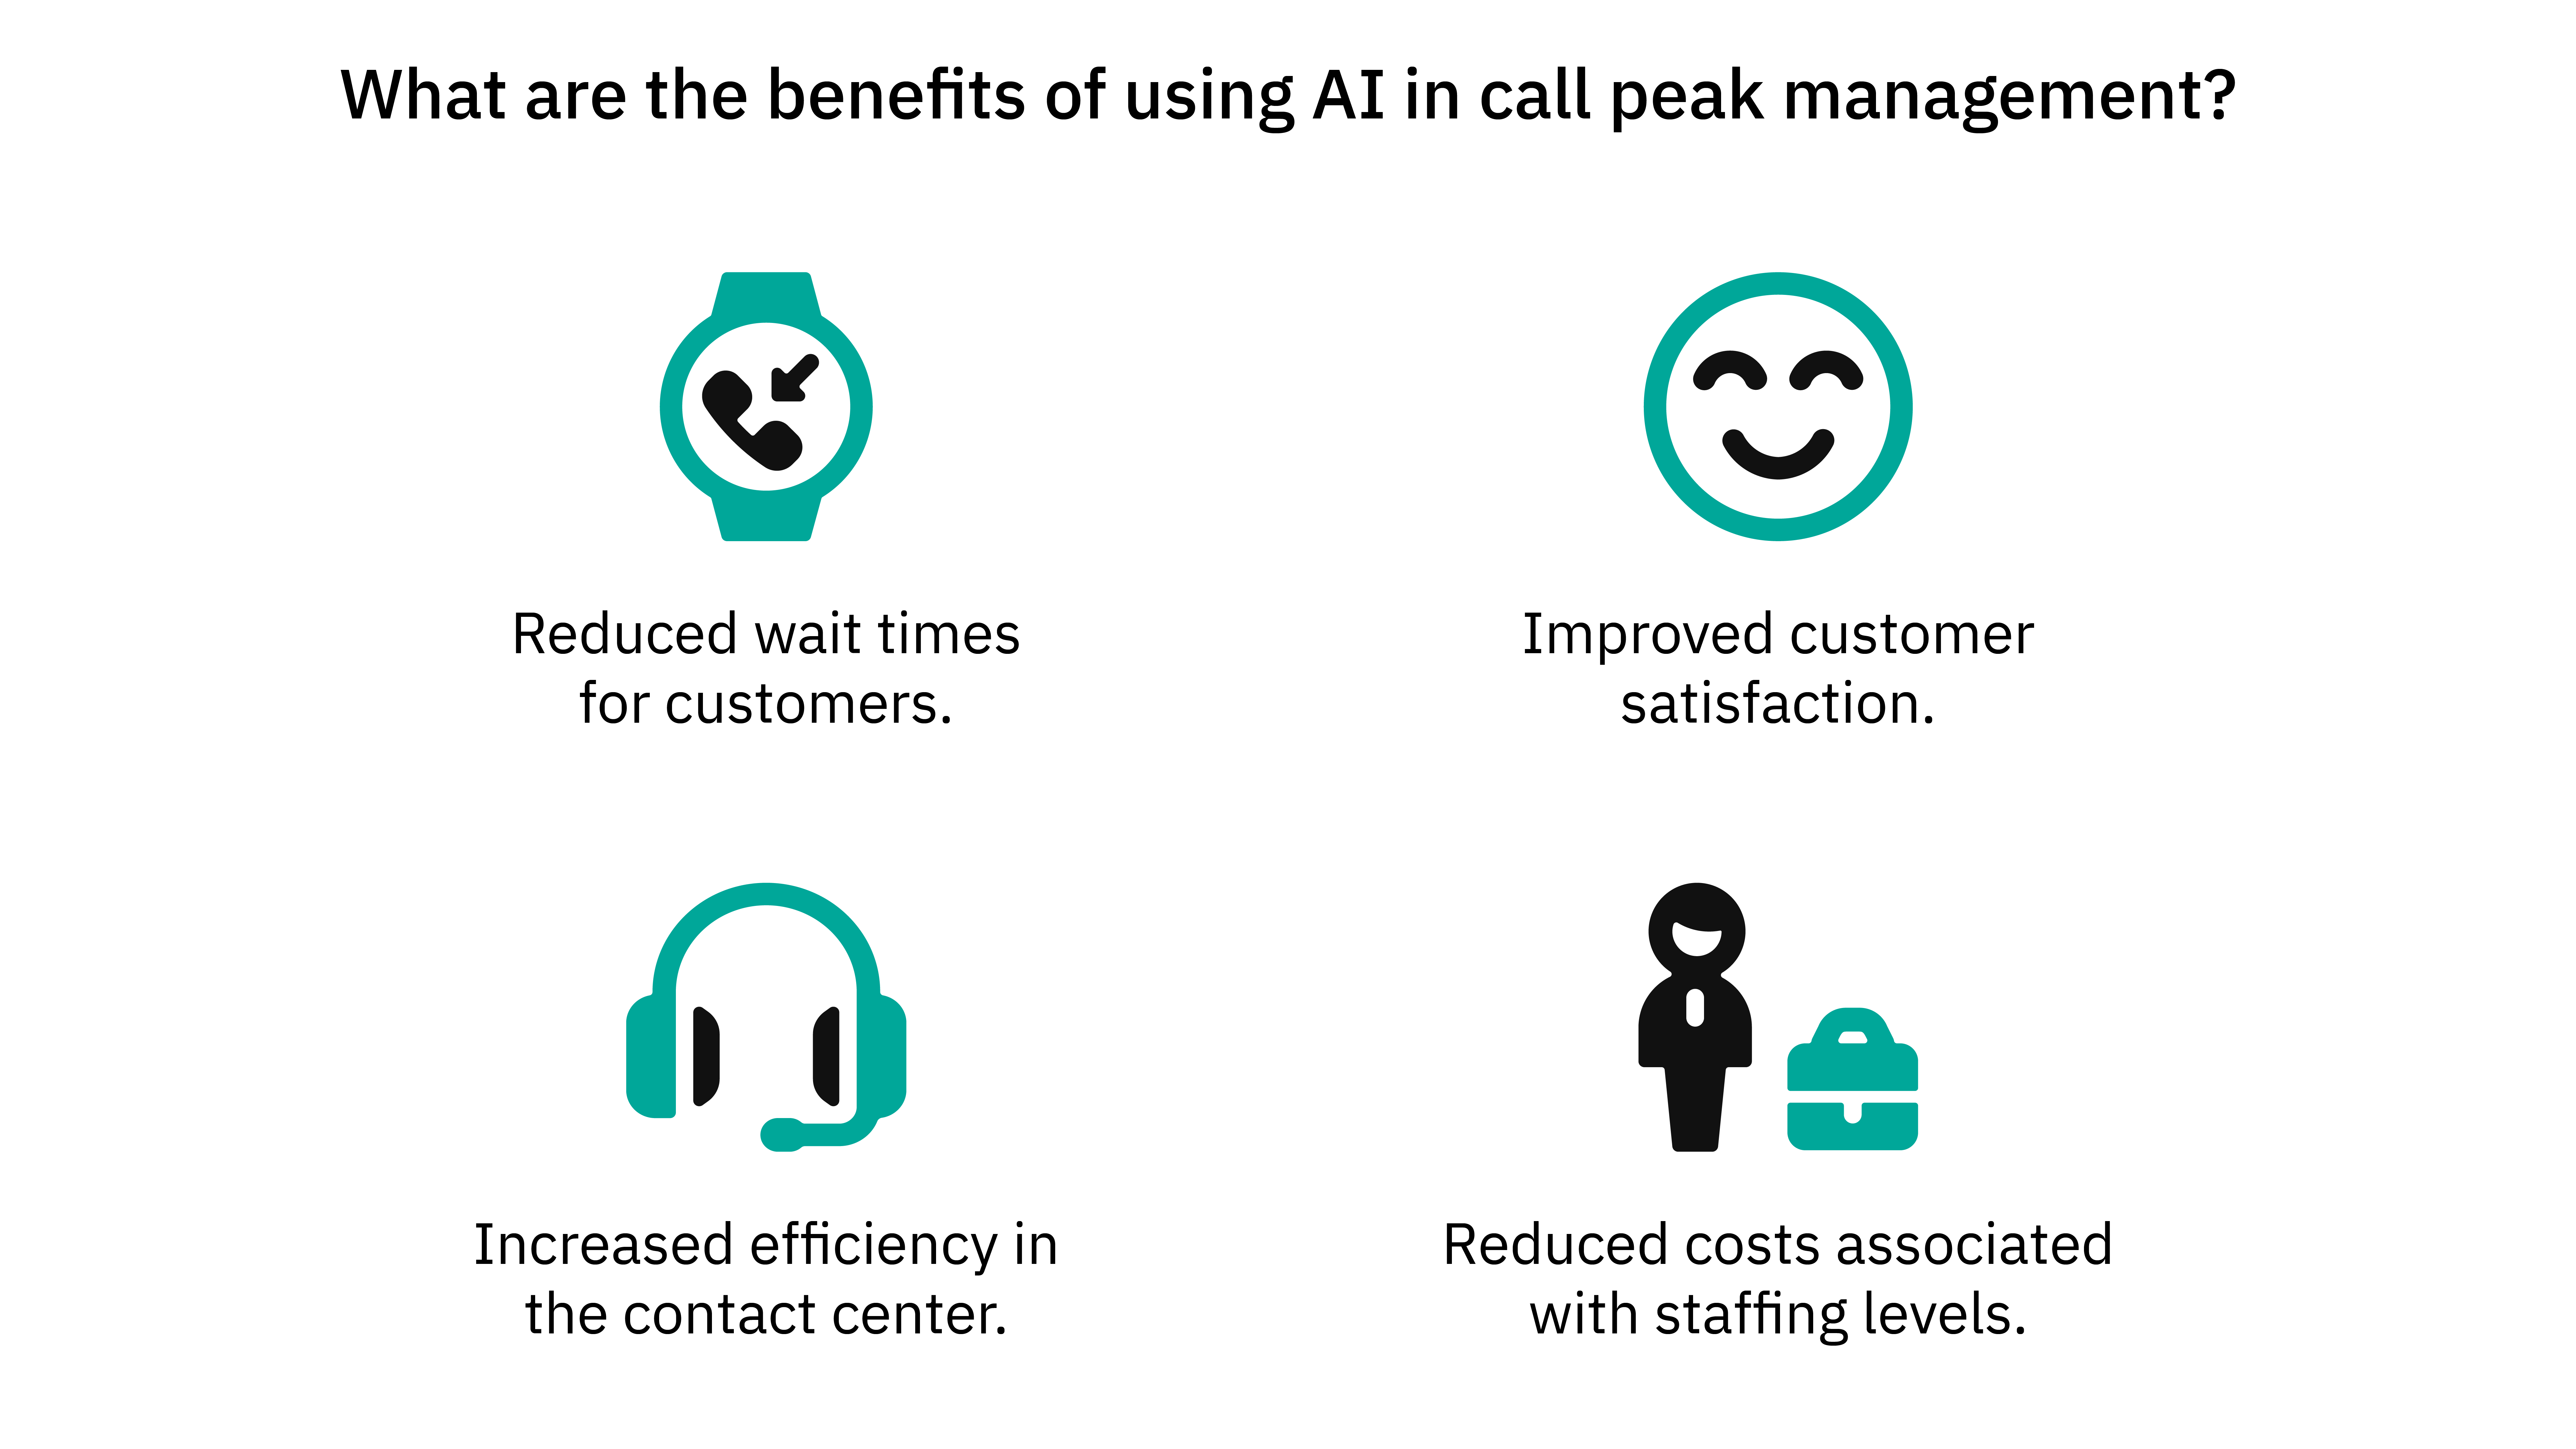 What are the benefits of using AI in call peak management?